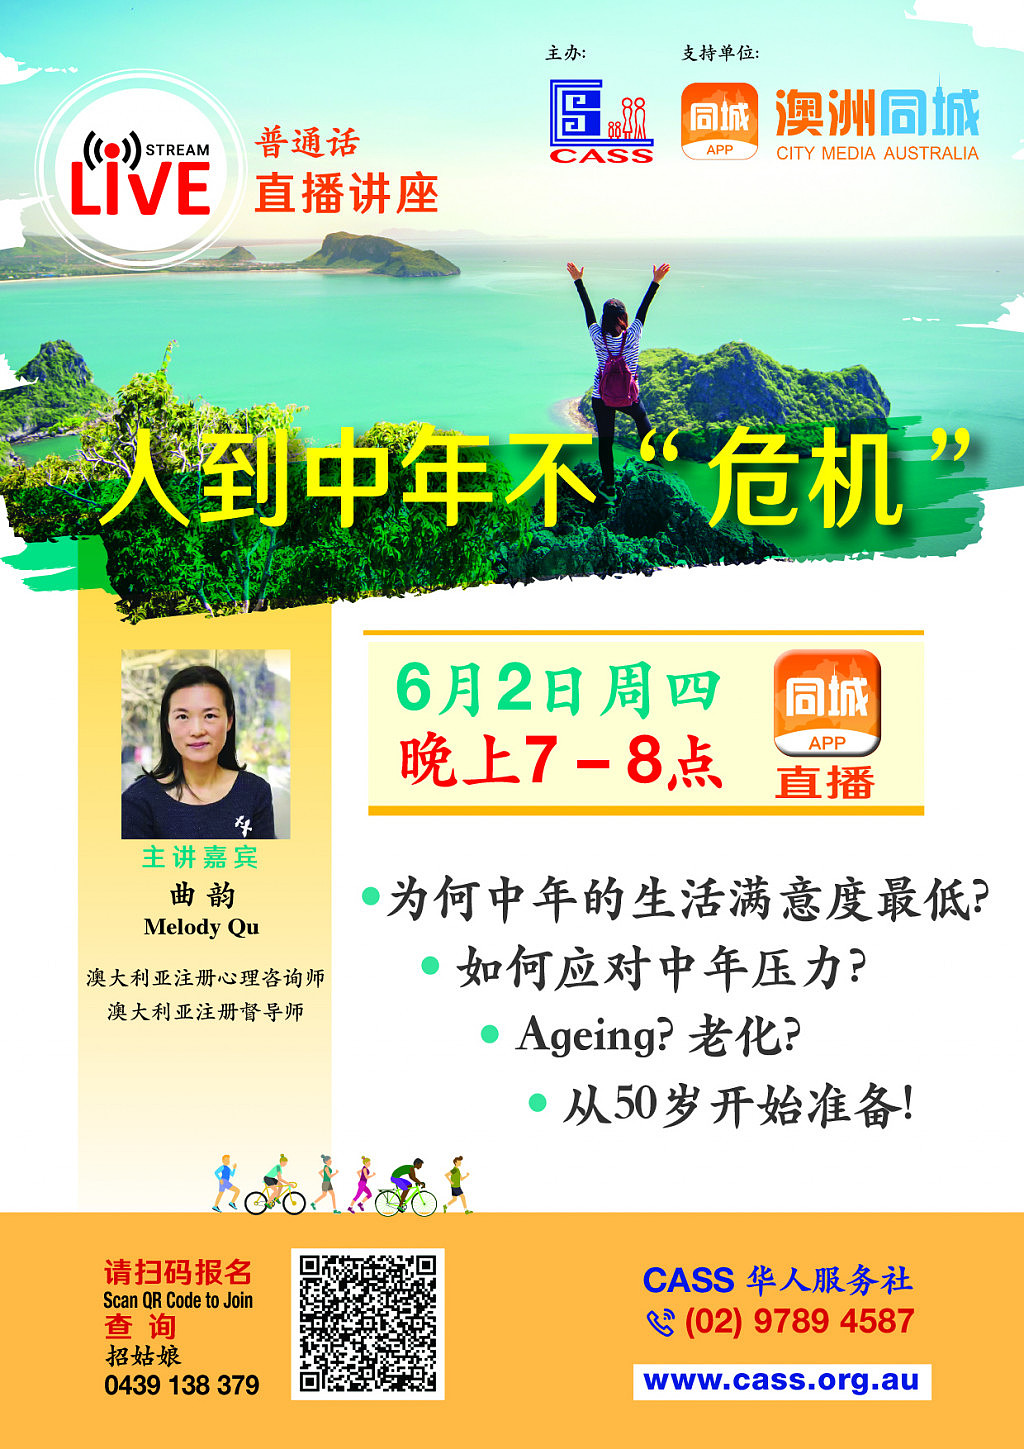 Live Streaming June A4 Poster 26May2022.jpg,0